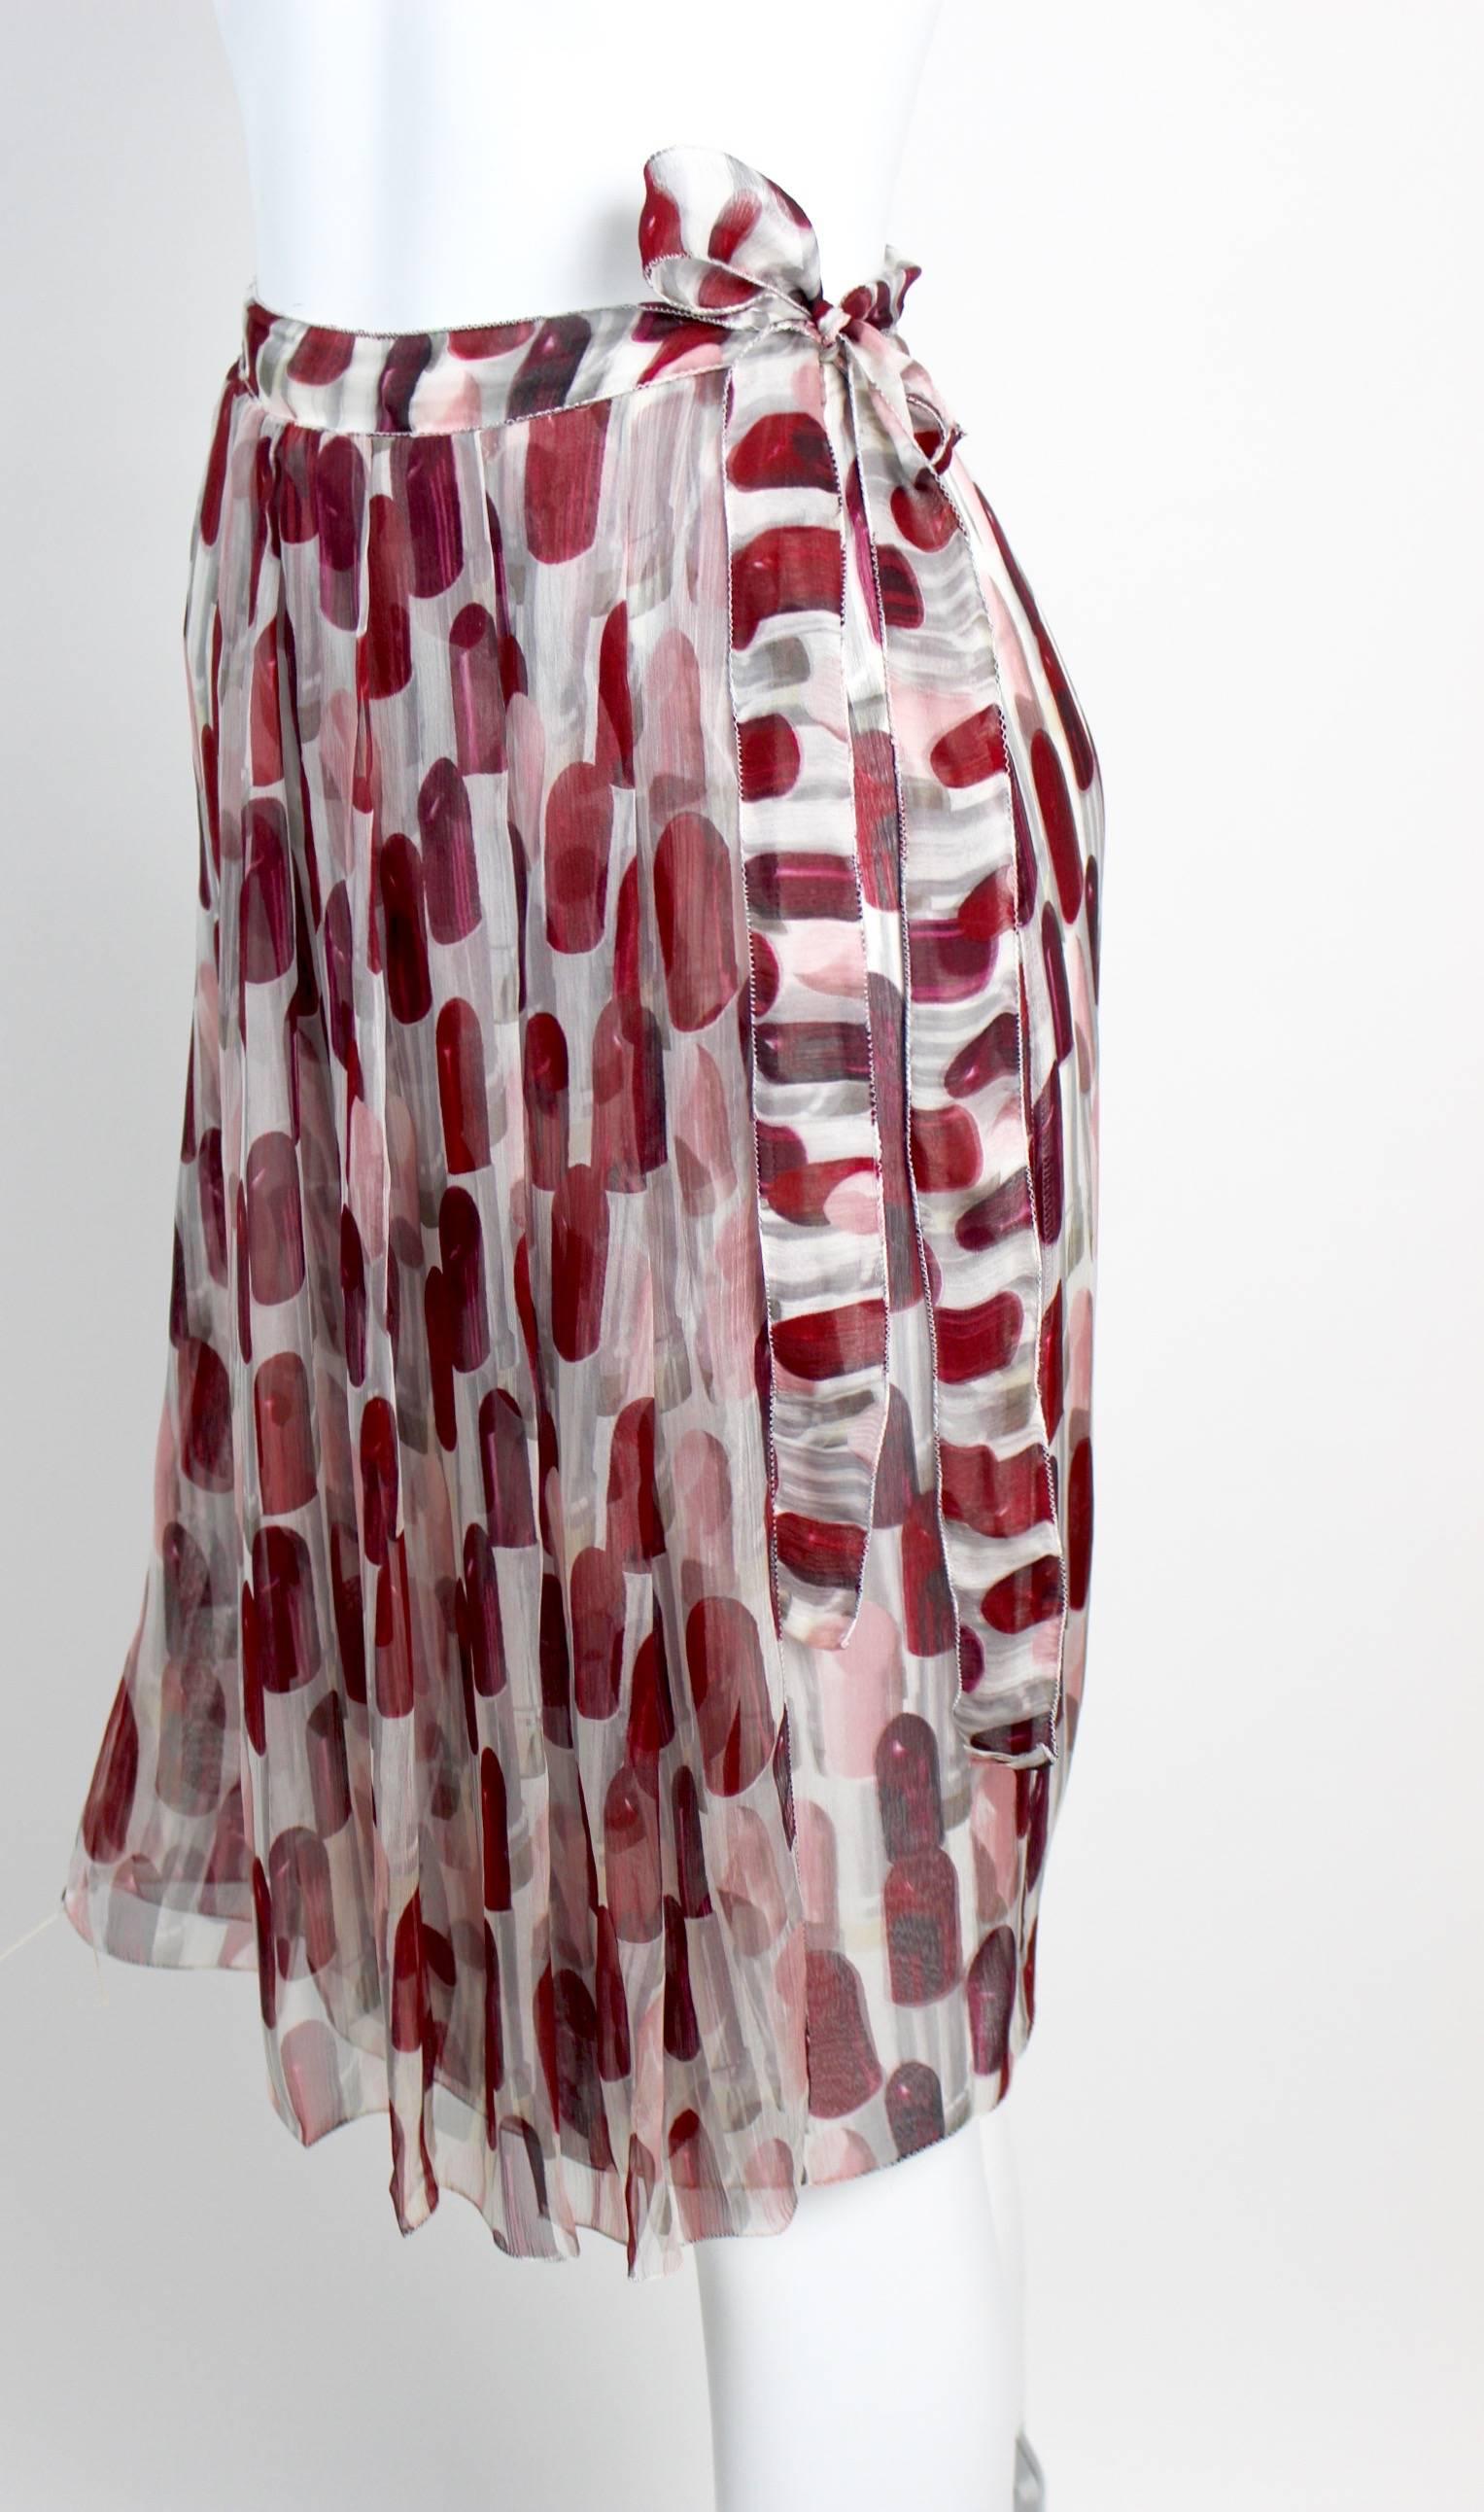 This is my third skirt from the Prada Spring 2000 collection that I am pleased to offer. Runway and ad campaign featured this print is now considered one of the fashion houses most iconic pieces. Fashioned from a light and airy silk chiffon  with